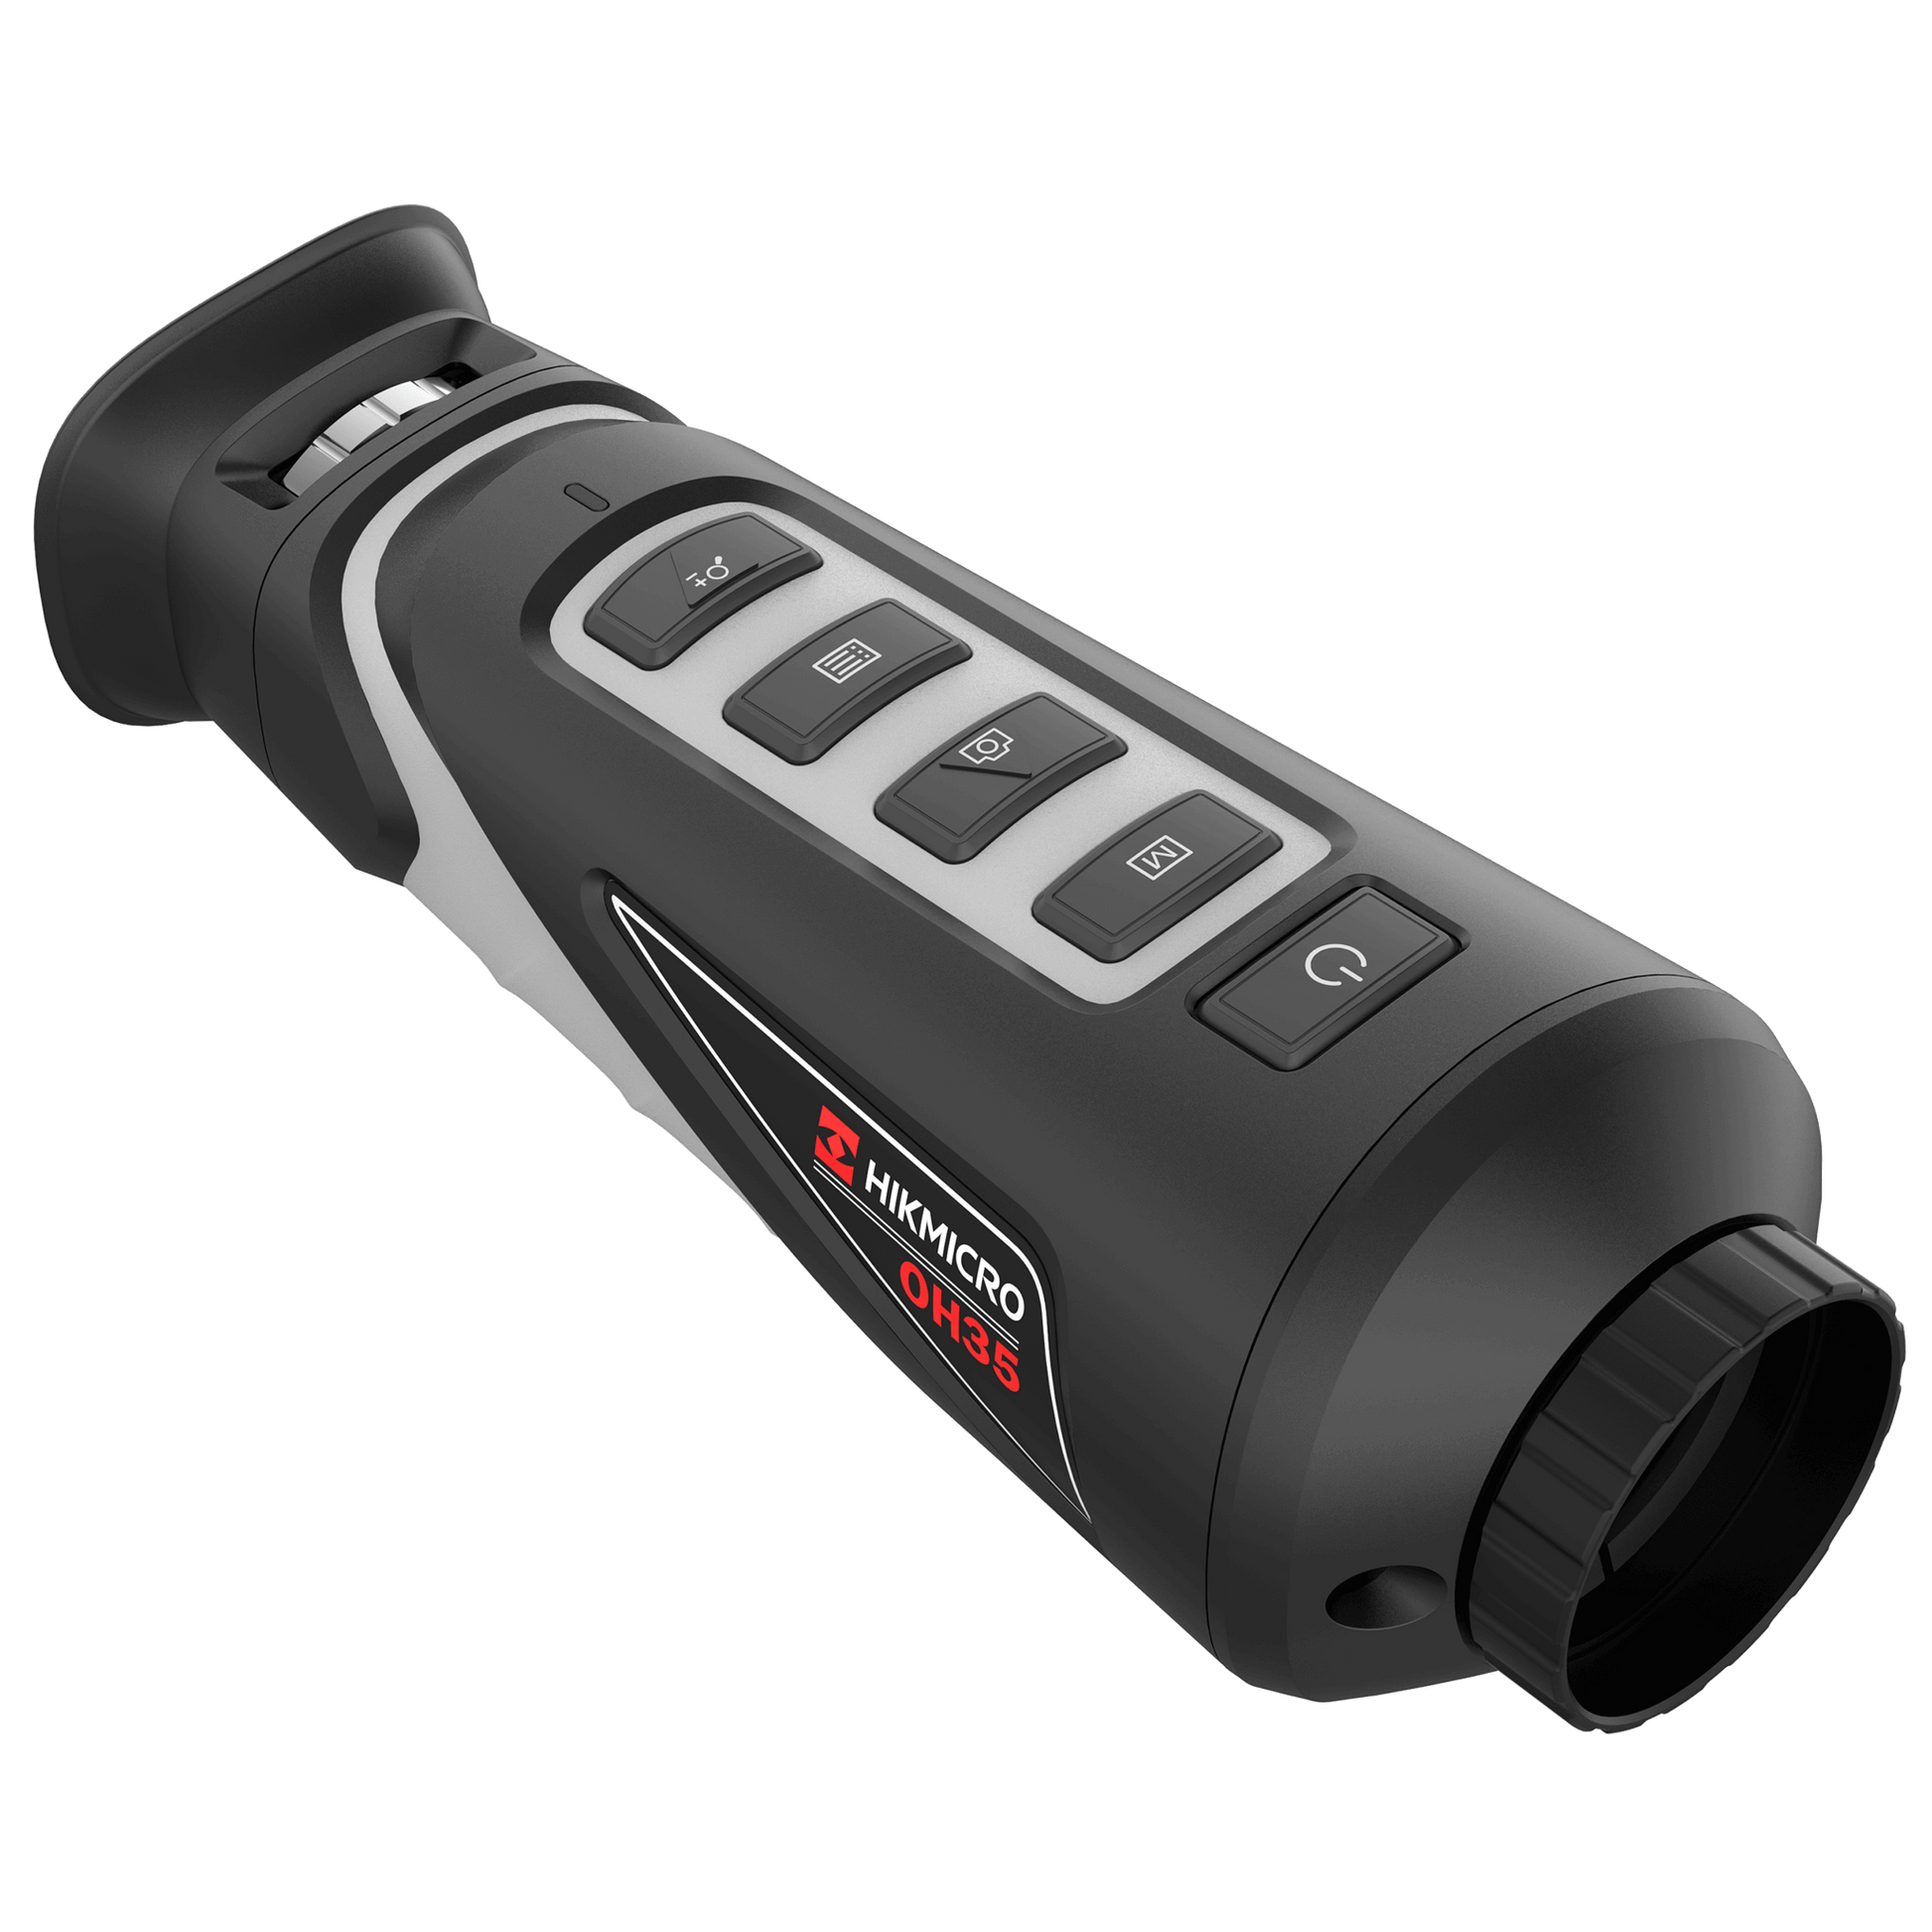 Cape Thermal - The best thermal imaging monoculars for sale - HikMicro OWL OH35 Handheld thermal imaging monocular - Right Side View